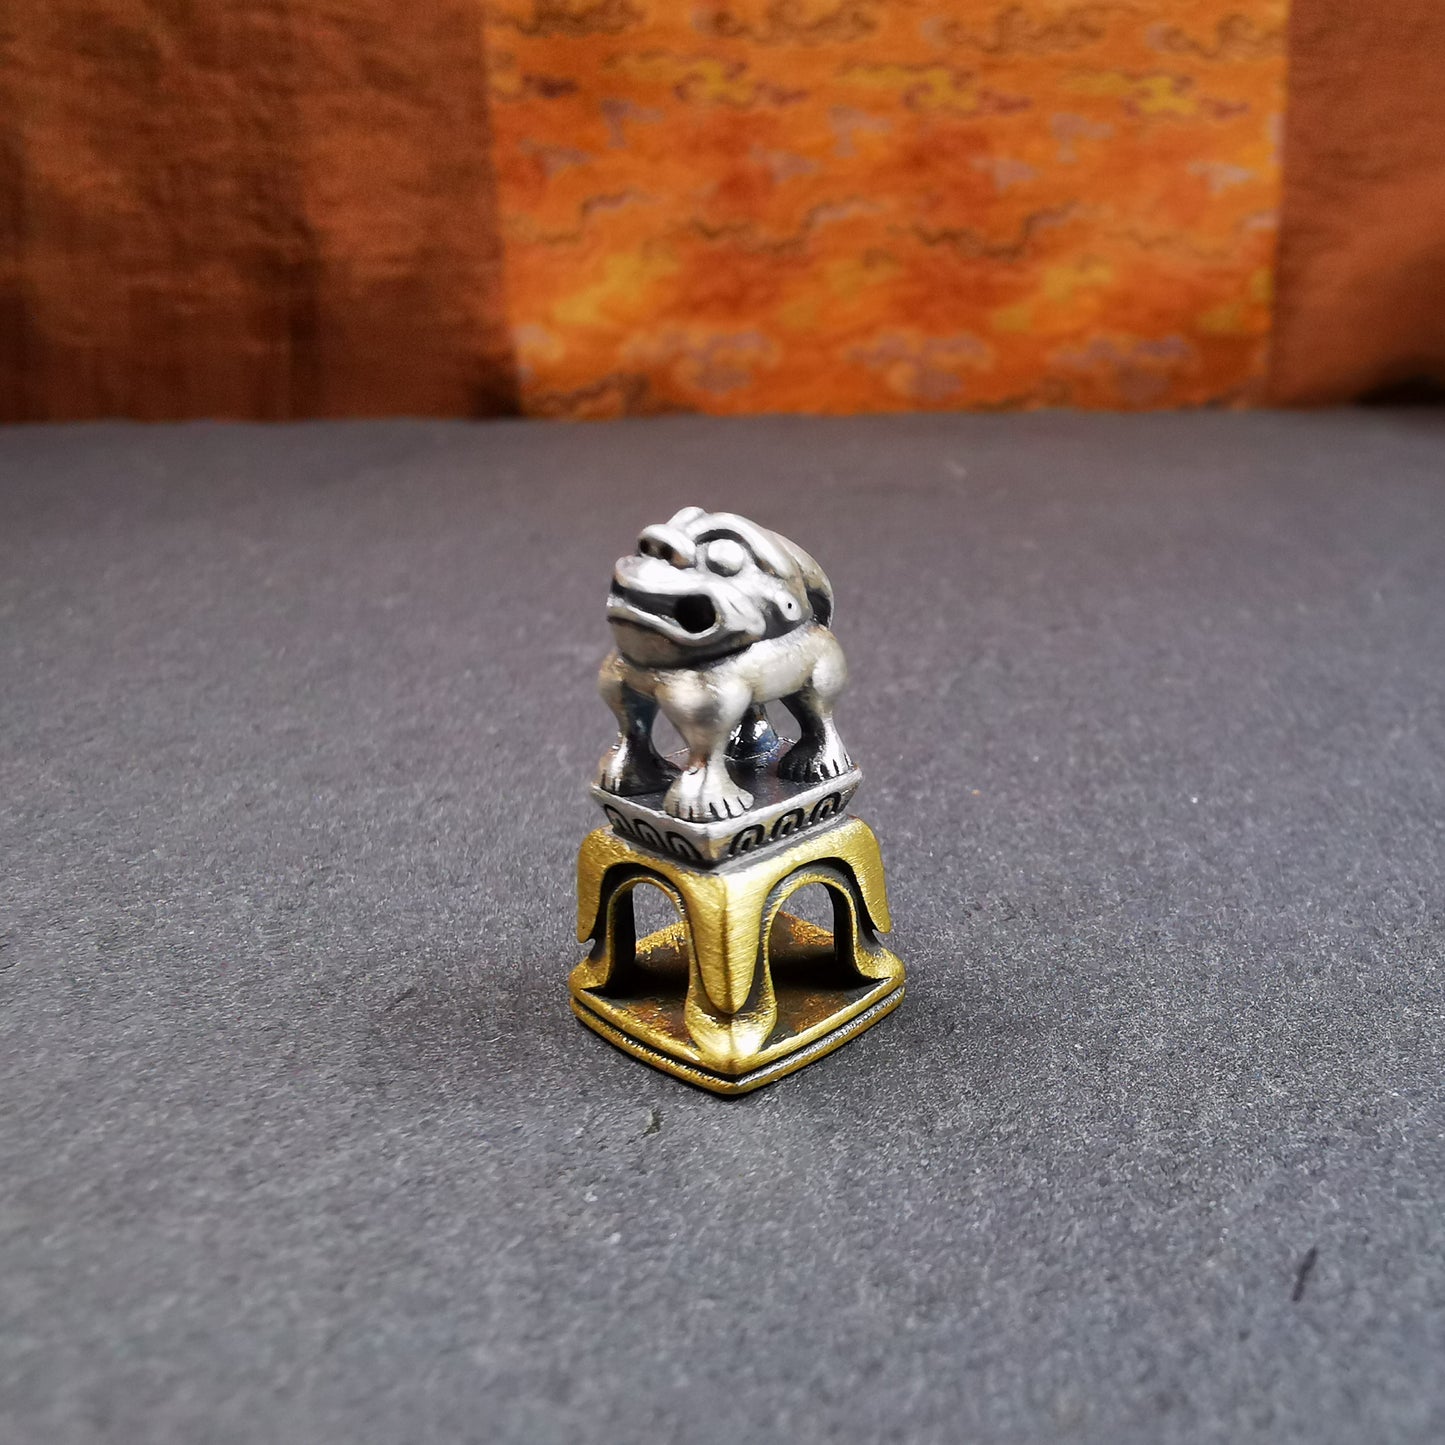 This tibetan snow lion seal was handmade from tibetan craftman. It is made of silver and brass,carved snow lion on the top and the Swastika symbol seal on the bottom,size is 0.9 inches.